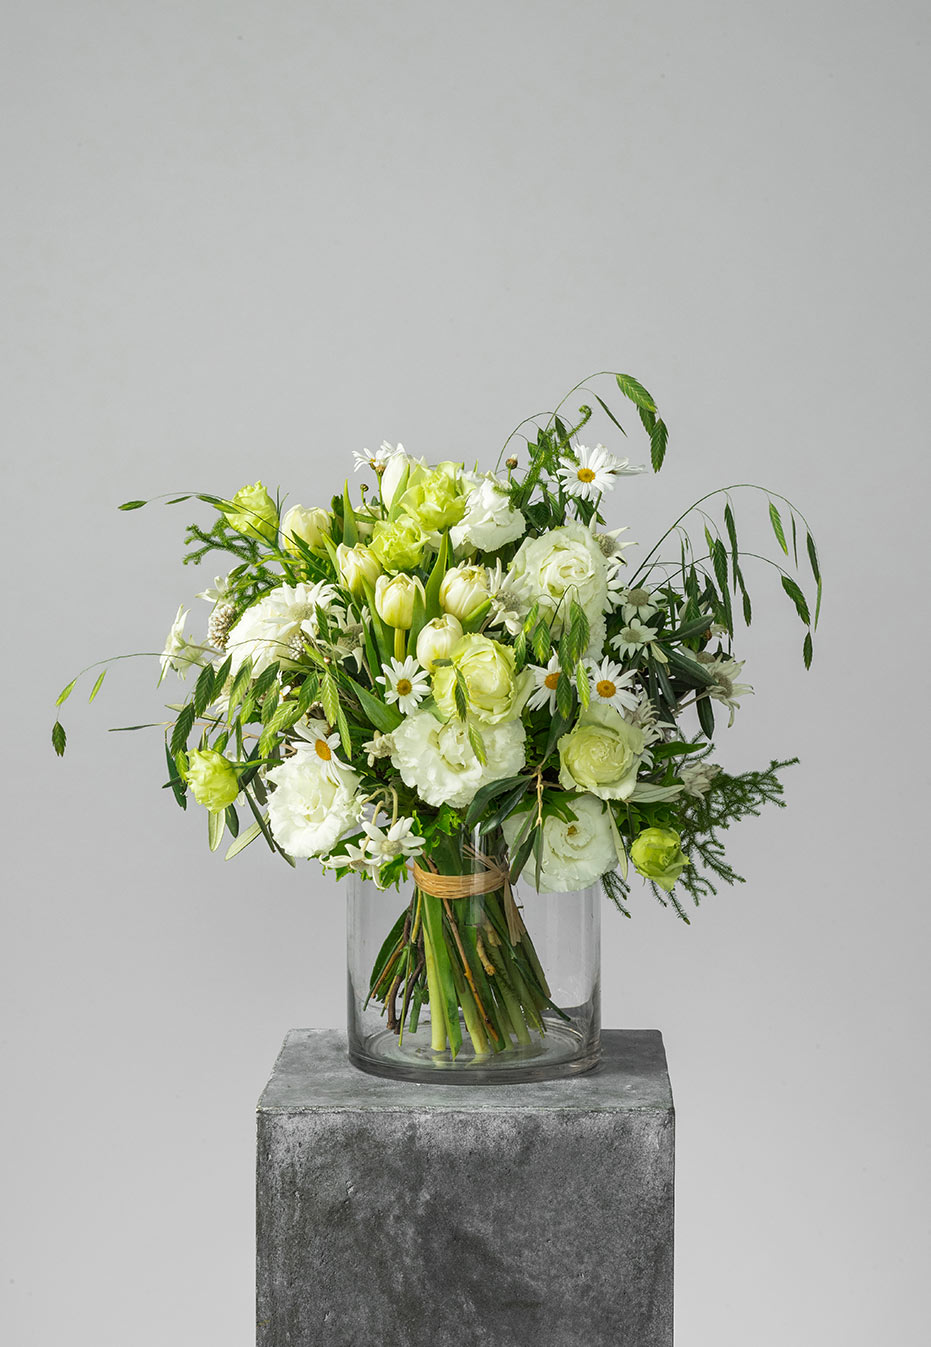 flower bouquet of daisy and tulip by flannel flowers